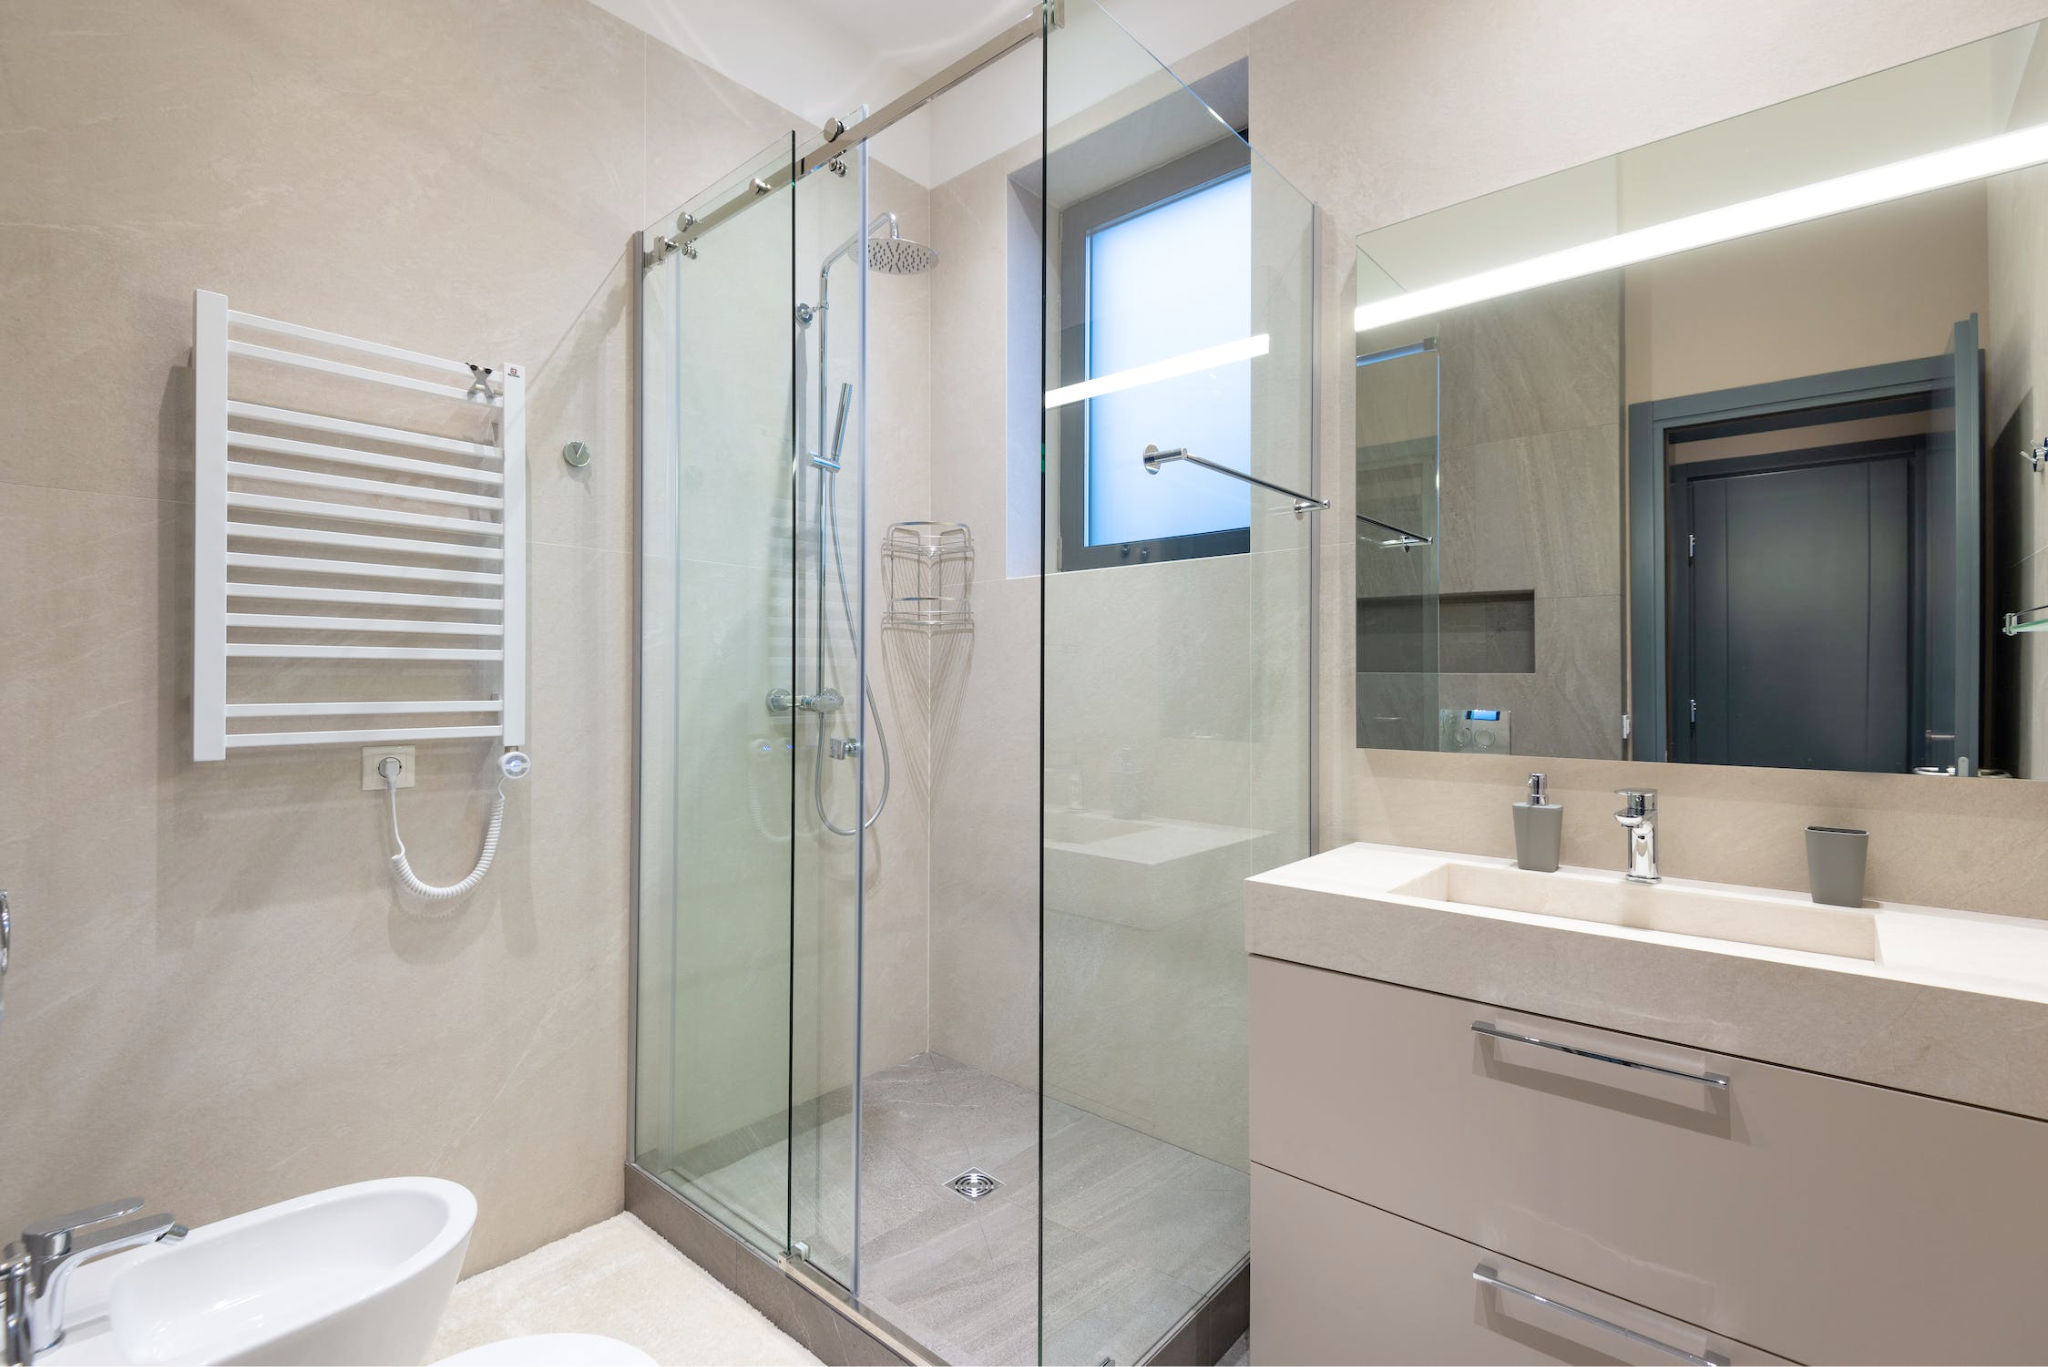 An image of a modern bathroom with sliding shower doors 